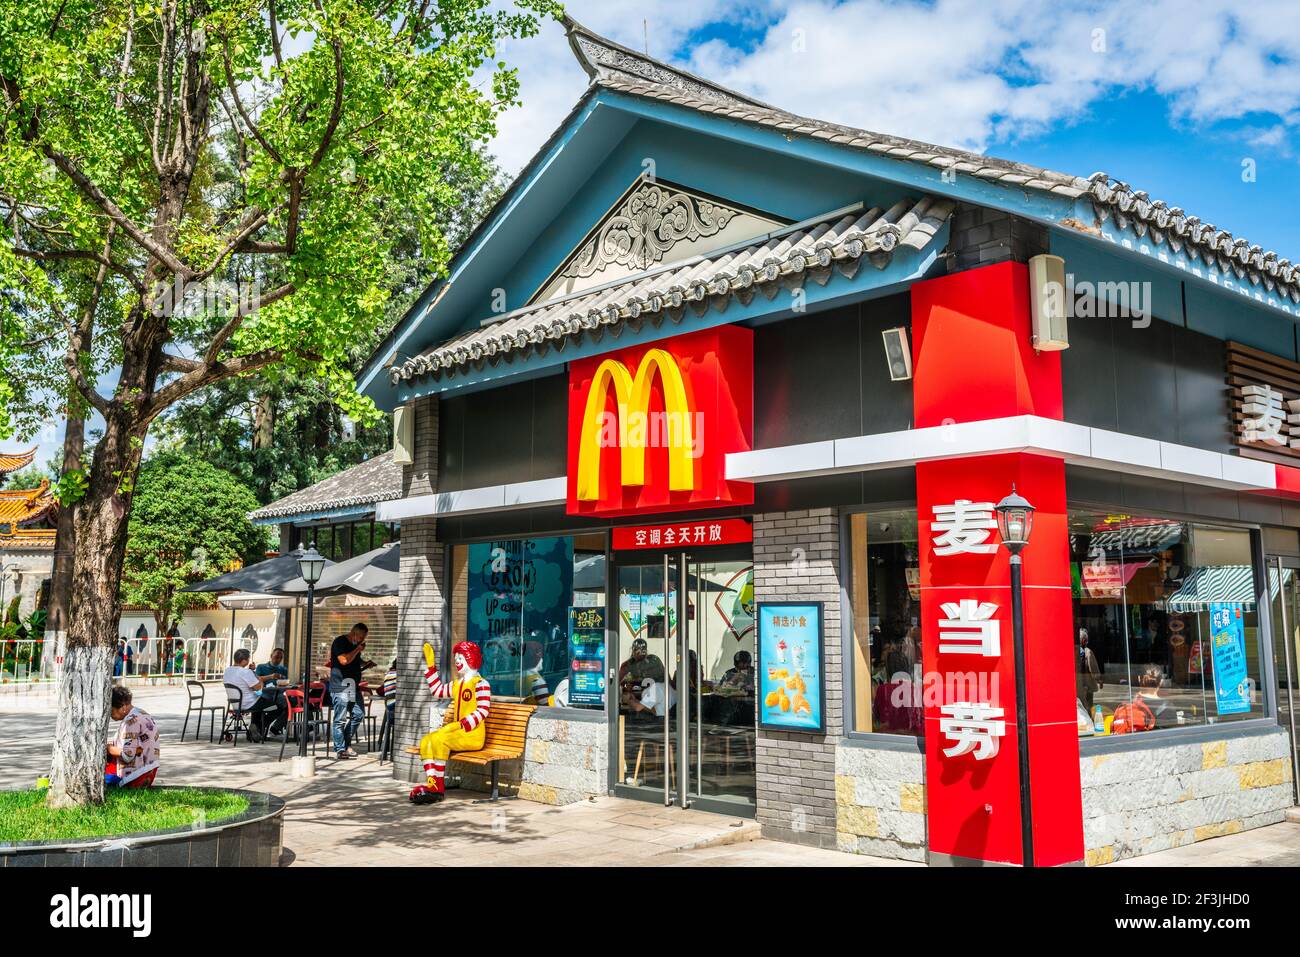 Kunming Yunnan China , 3 October 2020 : McDonalds restaurant entrance with logo and name in Chinese characters in a traditional architecture building Stock Photo